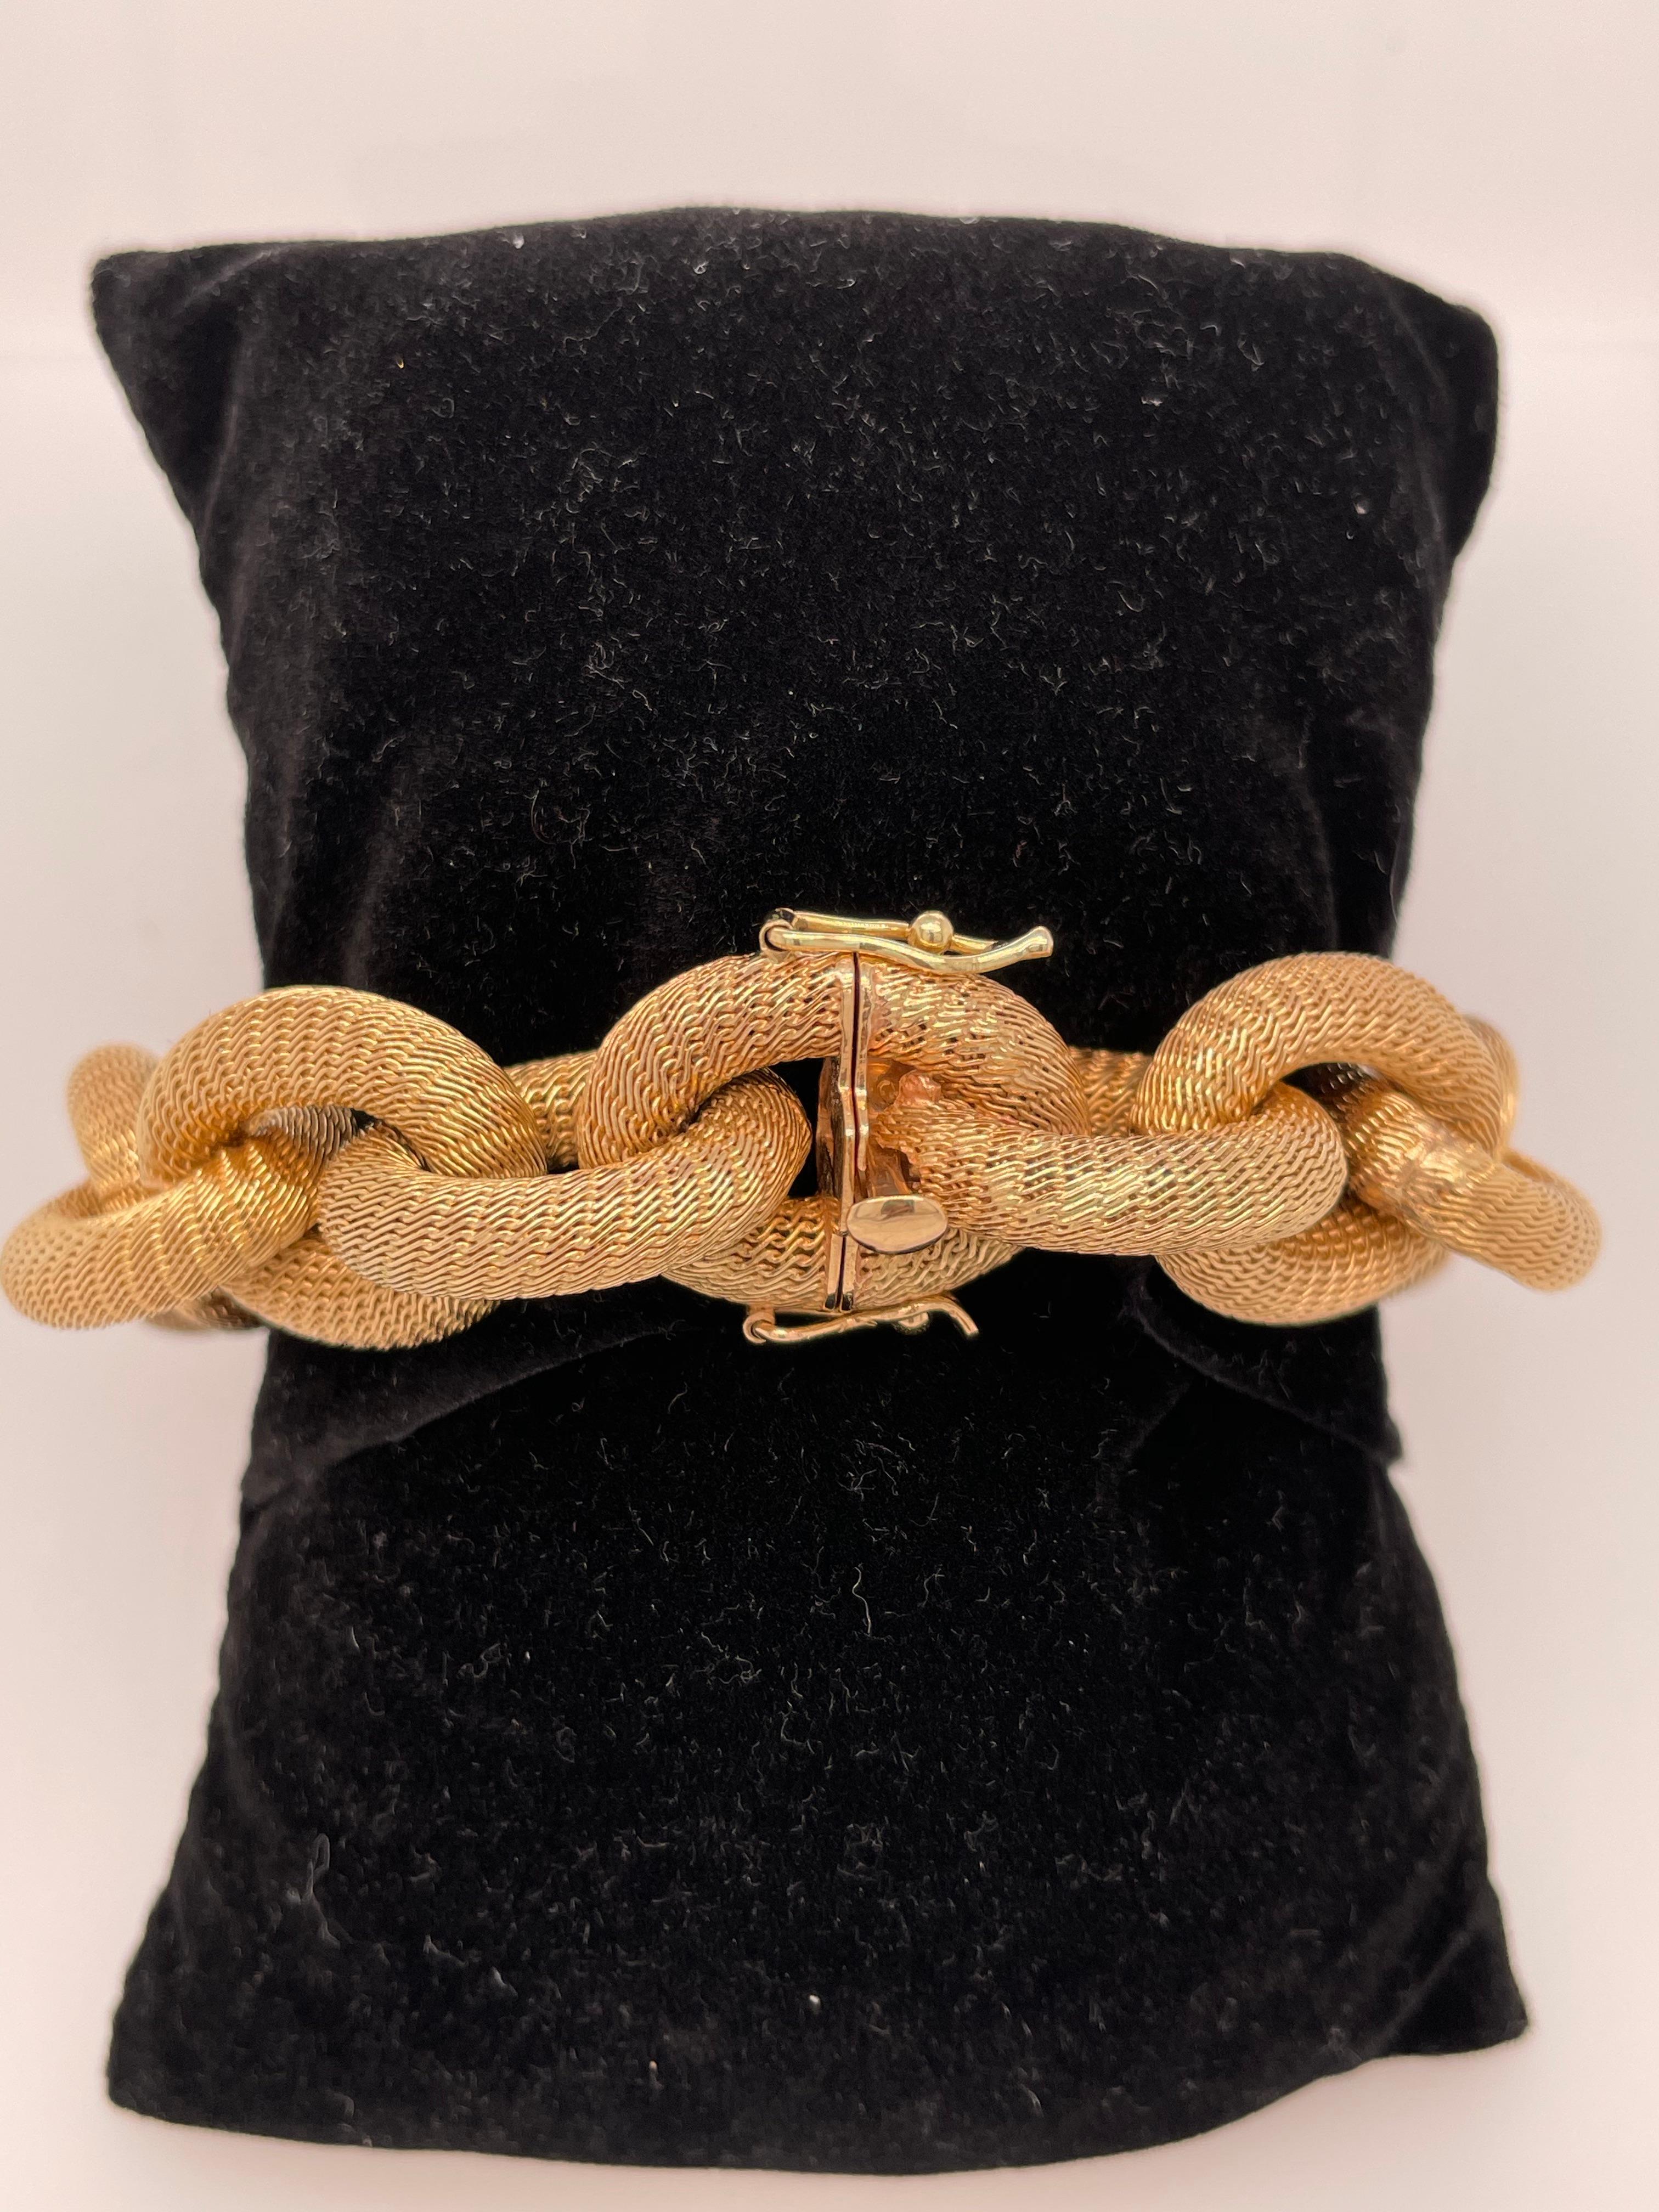 Exceptionally made Italian yellow gold link bracelet.  This bracelet is 18K yellow gold, compromised of interlocking woven mesh oval links. This statement piece has somewhat of a matte finish to it. This fine piece is an everyday staple to any